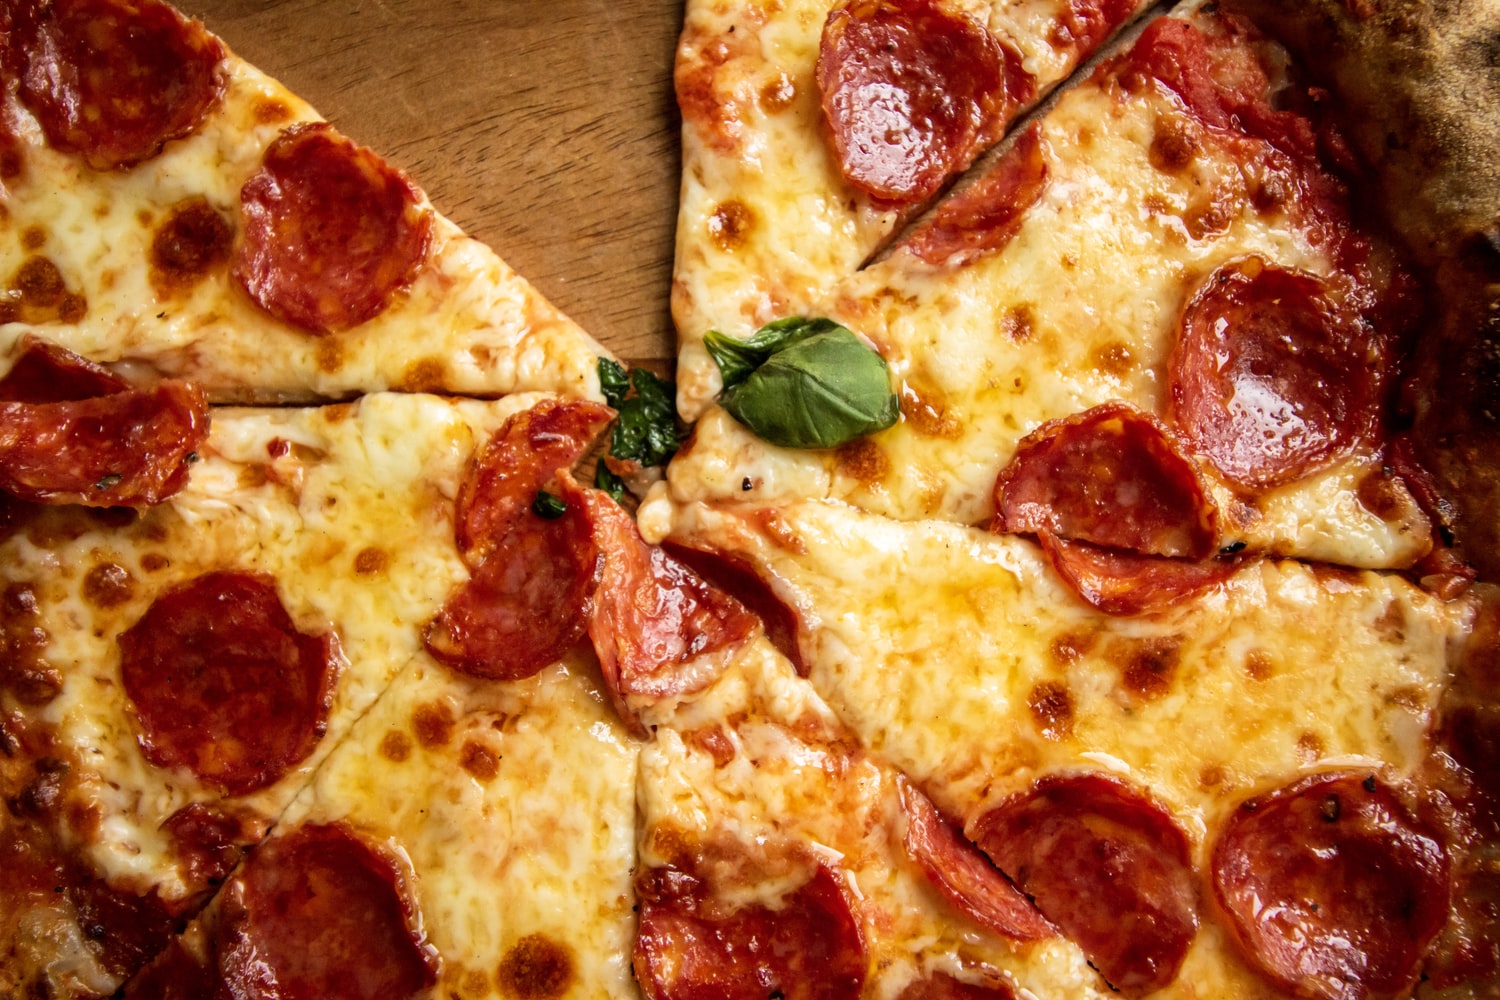 Treat Yourself! Where to Find the Best Pizza in Studio City